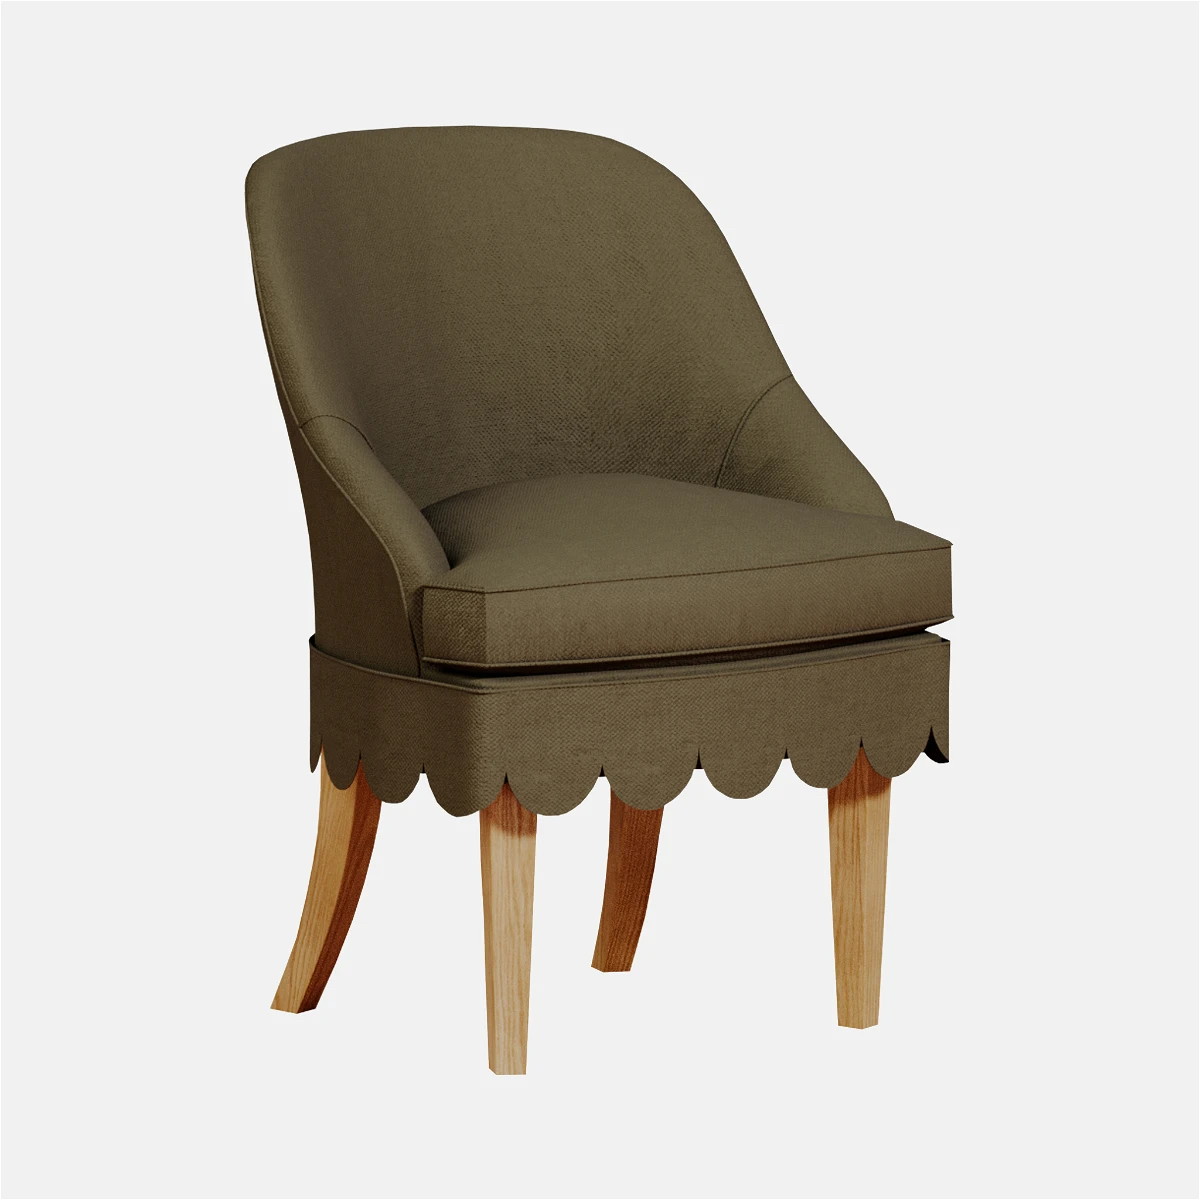 a chair with a scalloped back and wooden legs